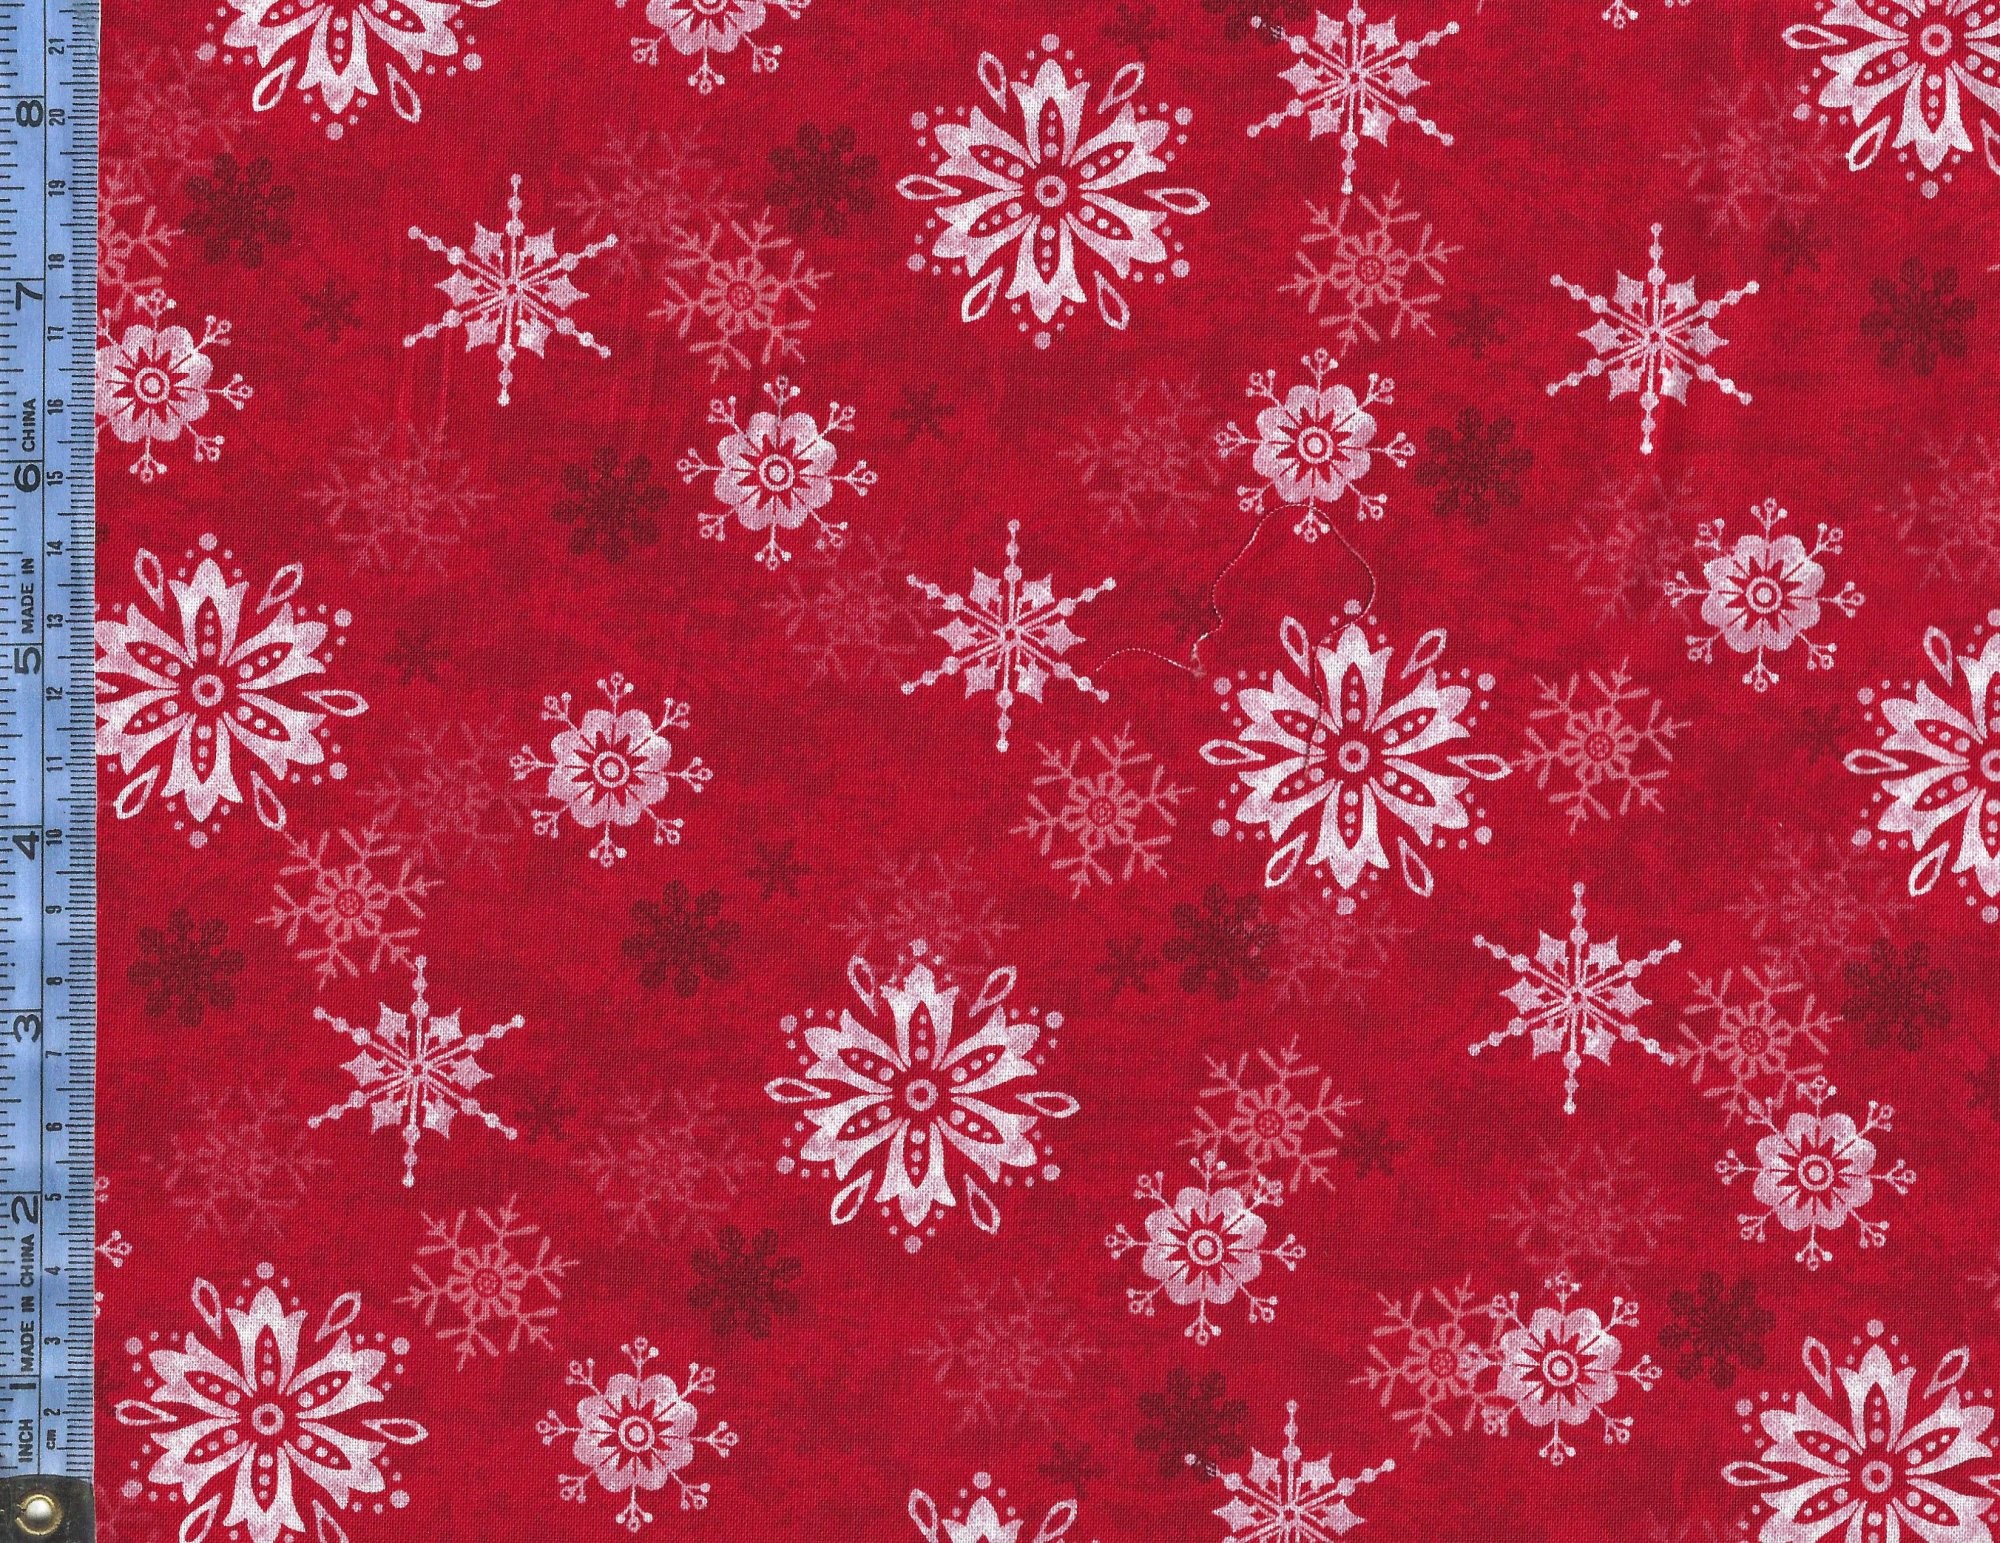 2000x1543 Winter Joy - (3801-88) white dark red and pink snowflakes on red